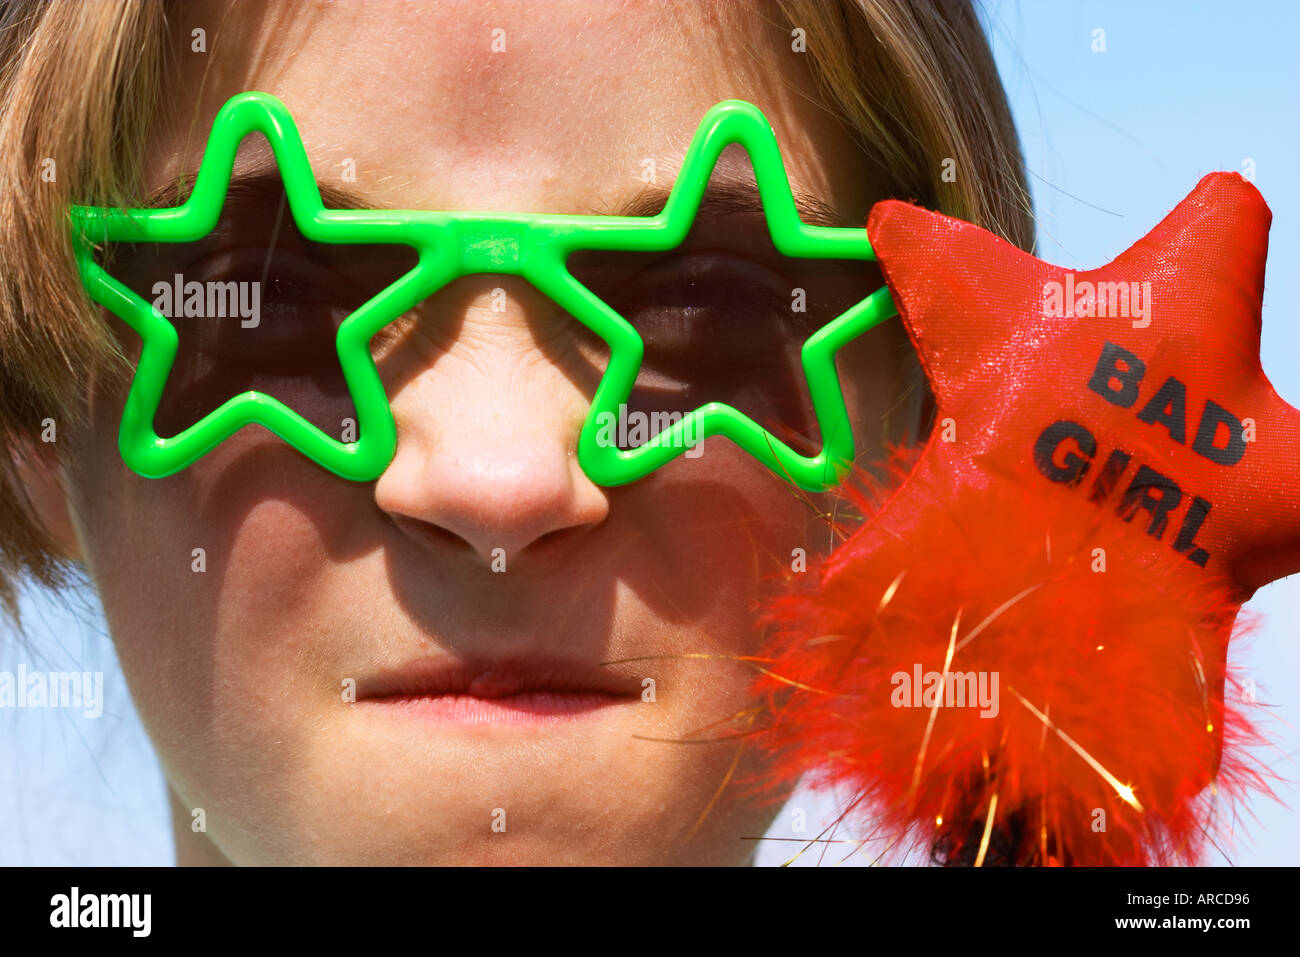 Bad Girl Little spoiled tearaway poses with sunglasses Stock Photo